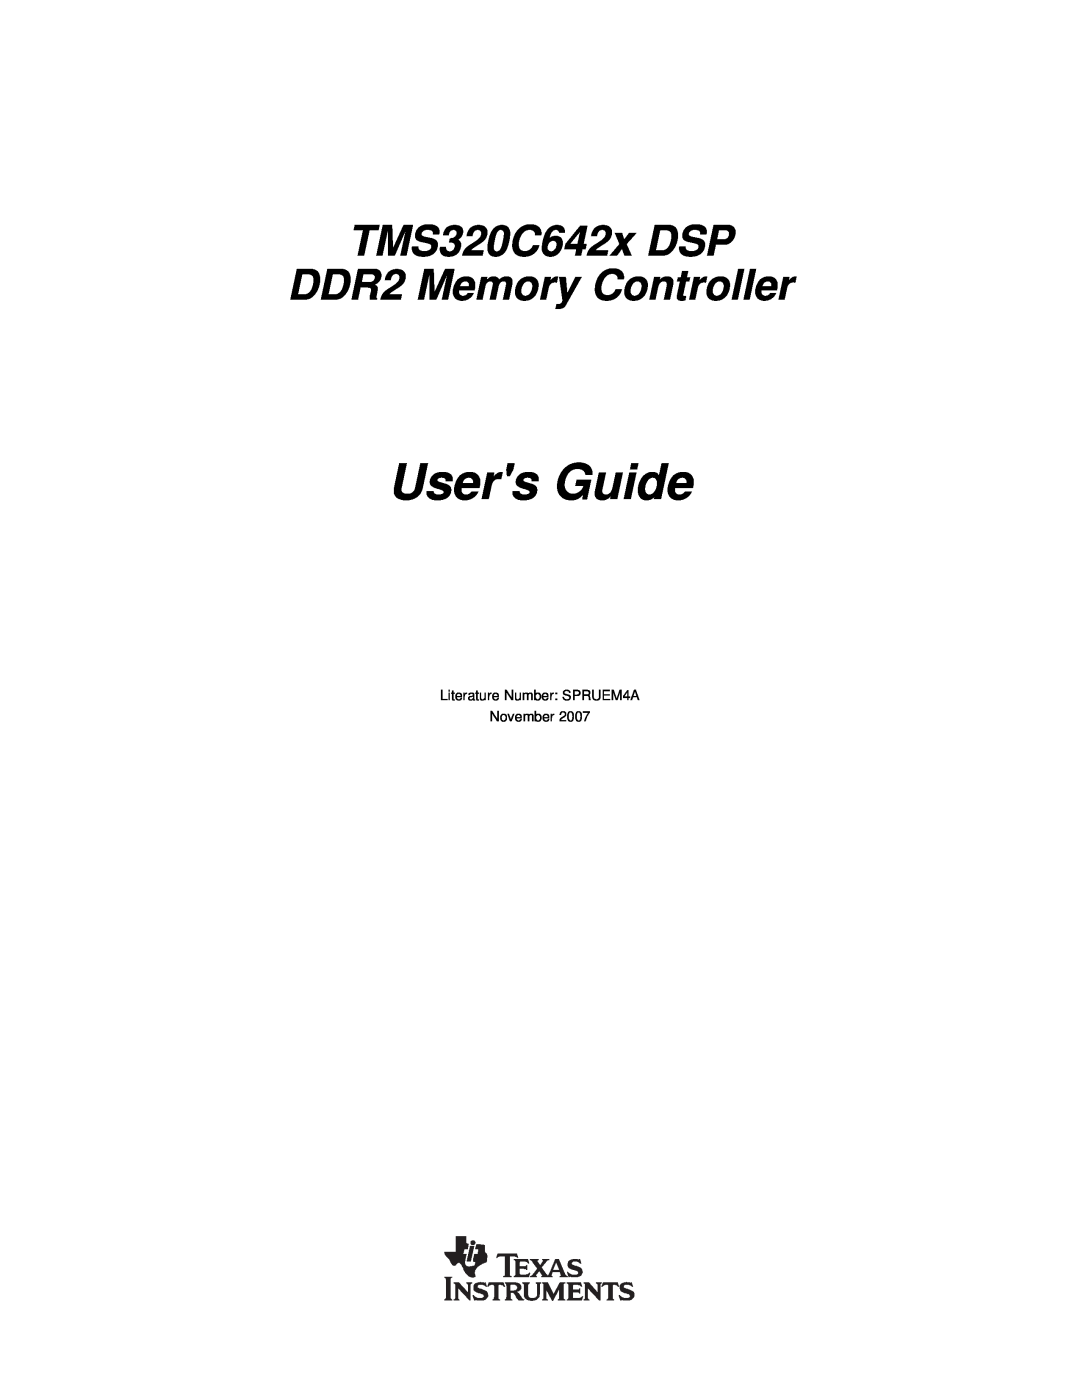 Texas Instruments manual Users Guide, TMS320C642x DSP DDR2 Memory Controller 